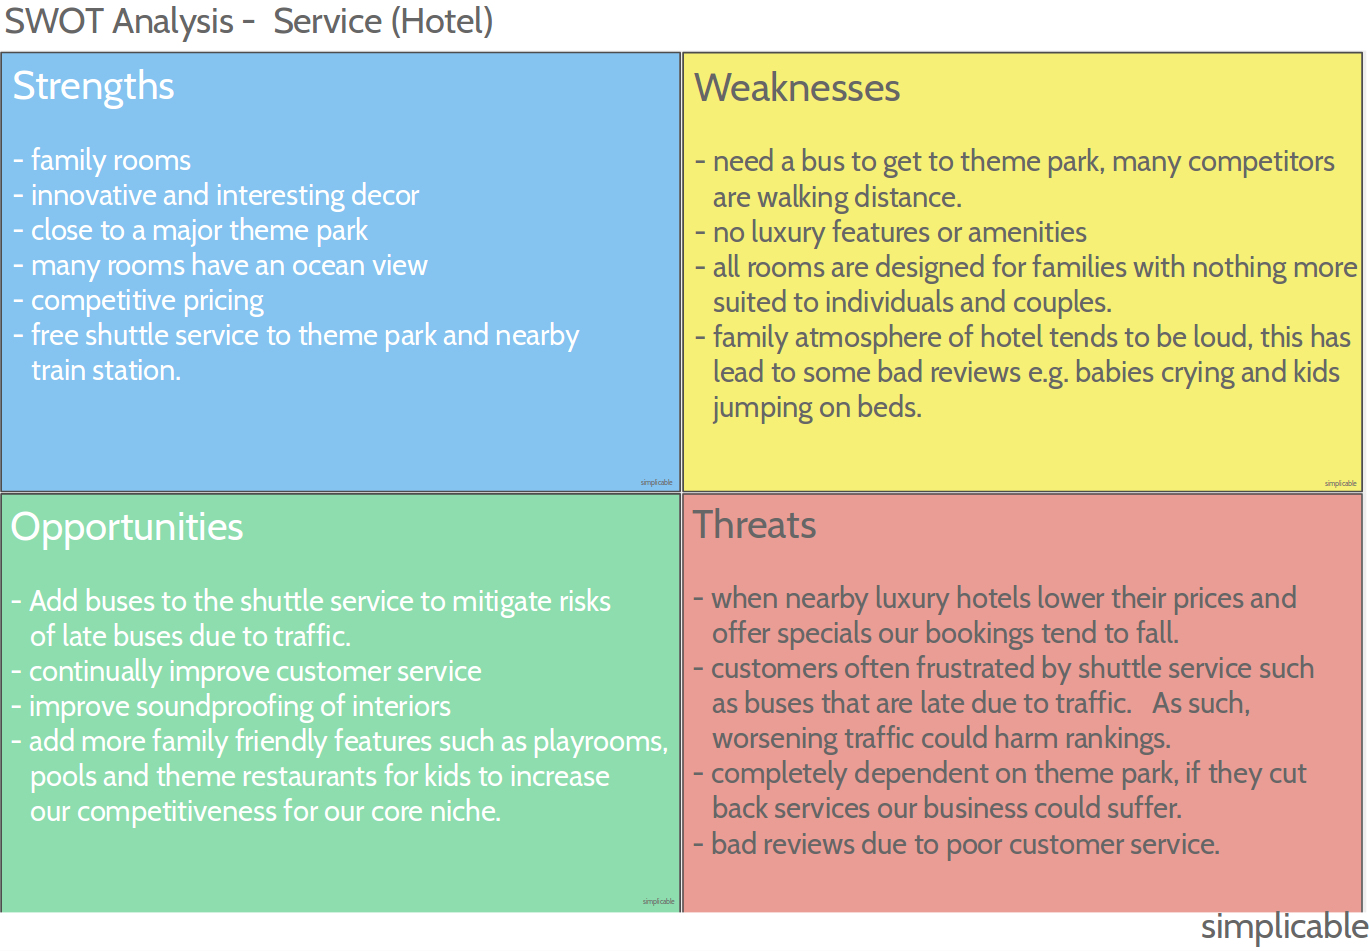 A swot analysis for a mid-range hotel that specializes in family rooms and features.   It is close to a major theme park but not as close as several luxury hotels in the area.